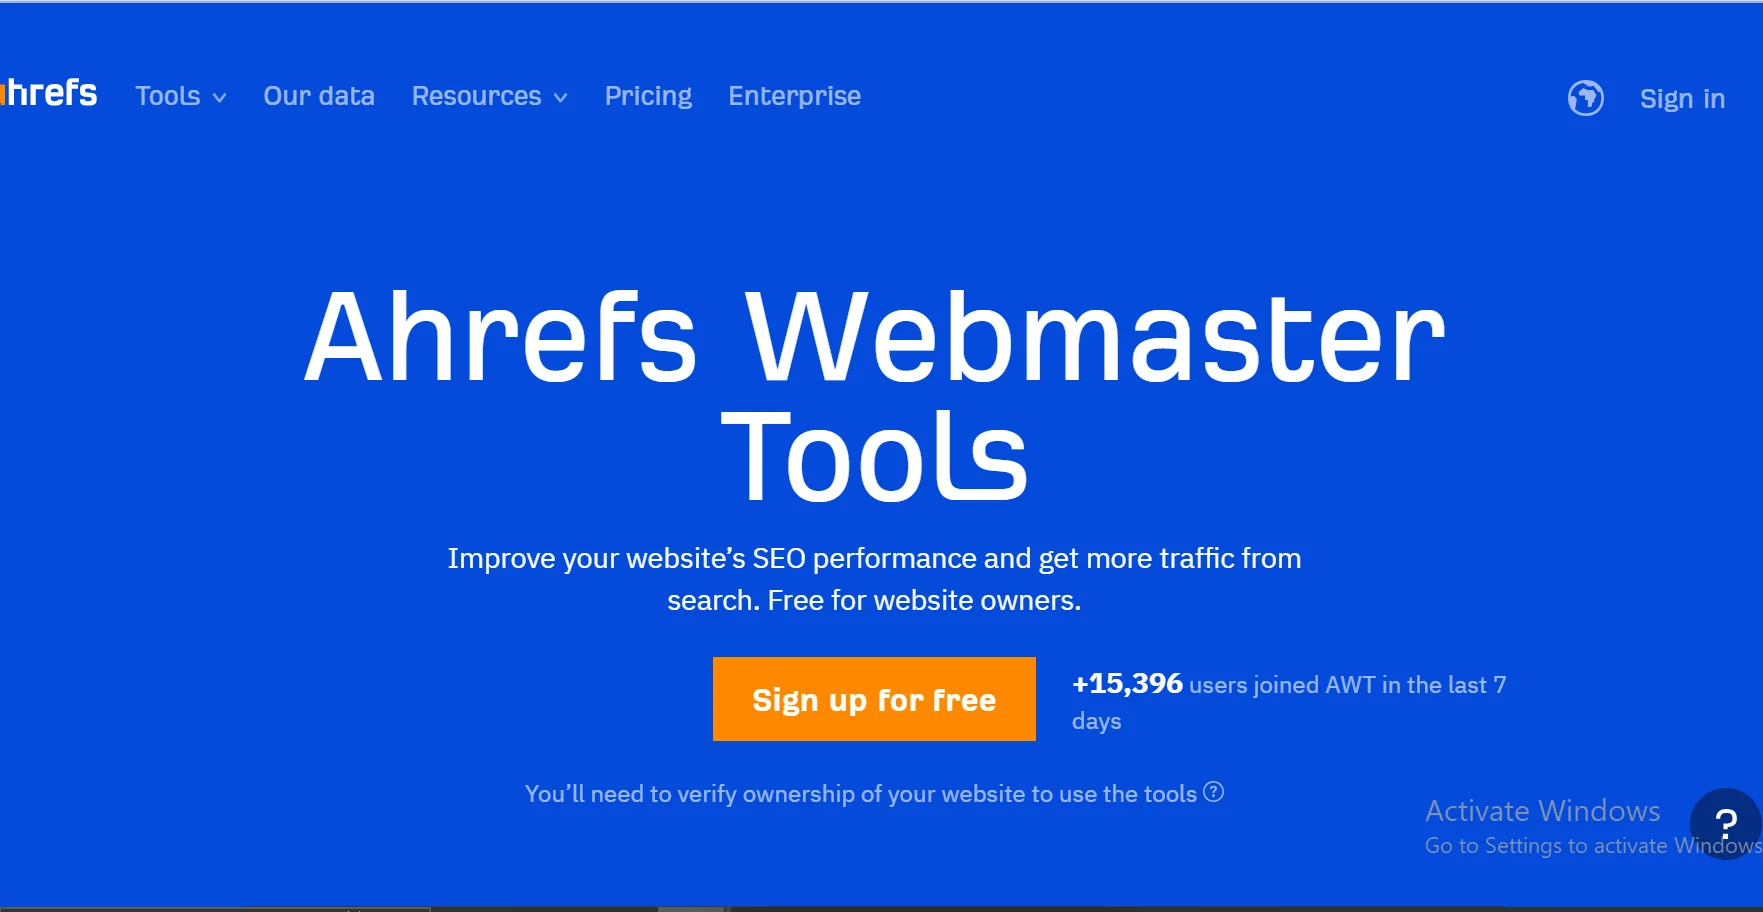 Homepage of Ahrefs Webmaster tools DIY seo software